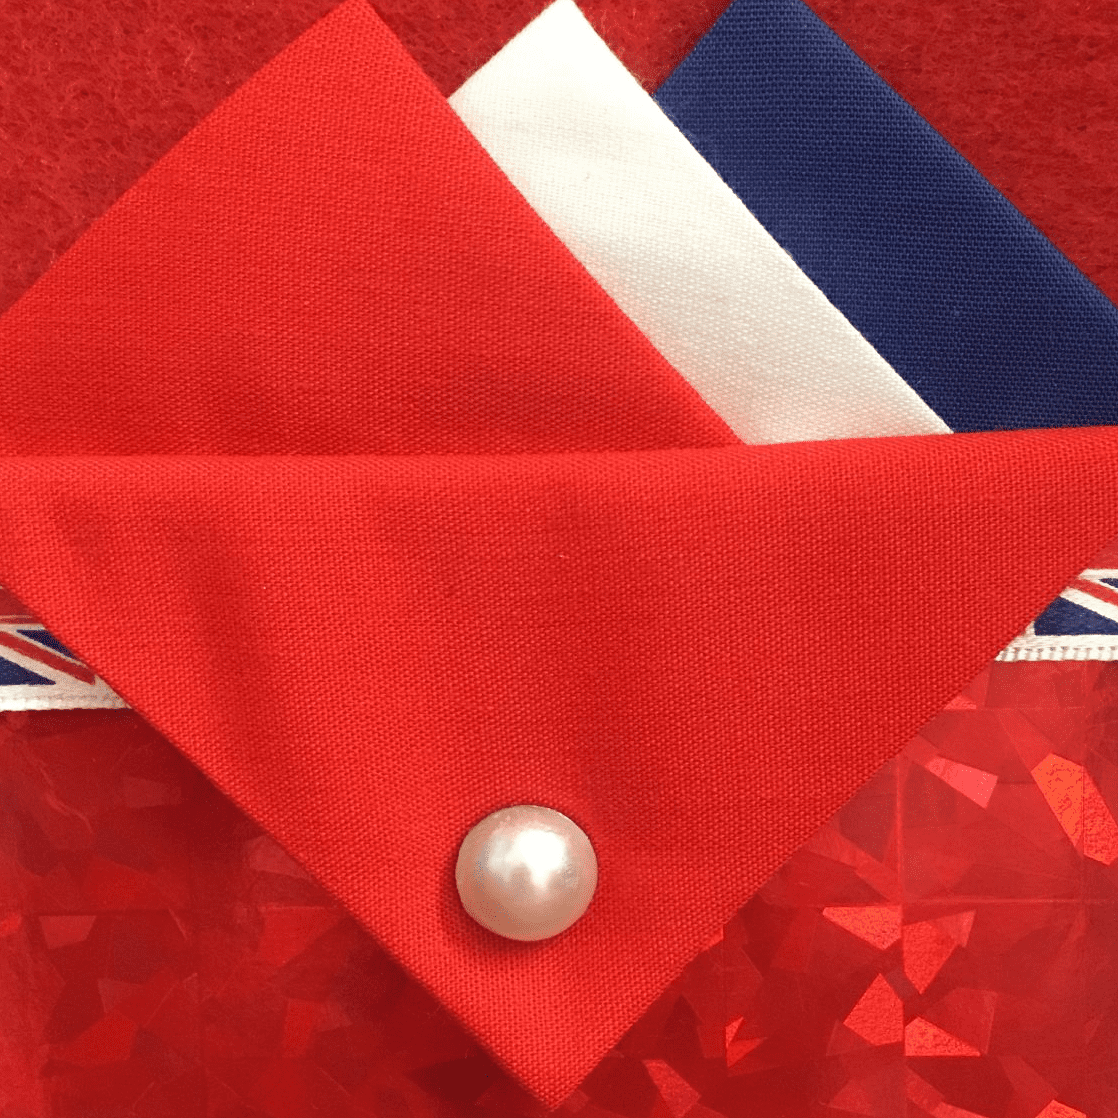 Red, White And Blue Hankie With Red Flap And Pin